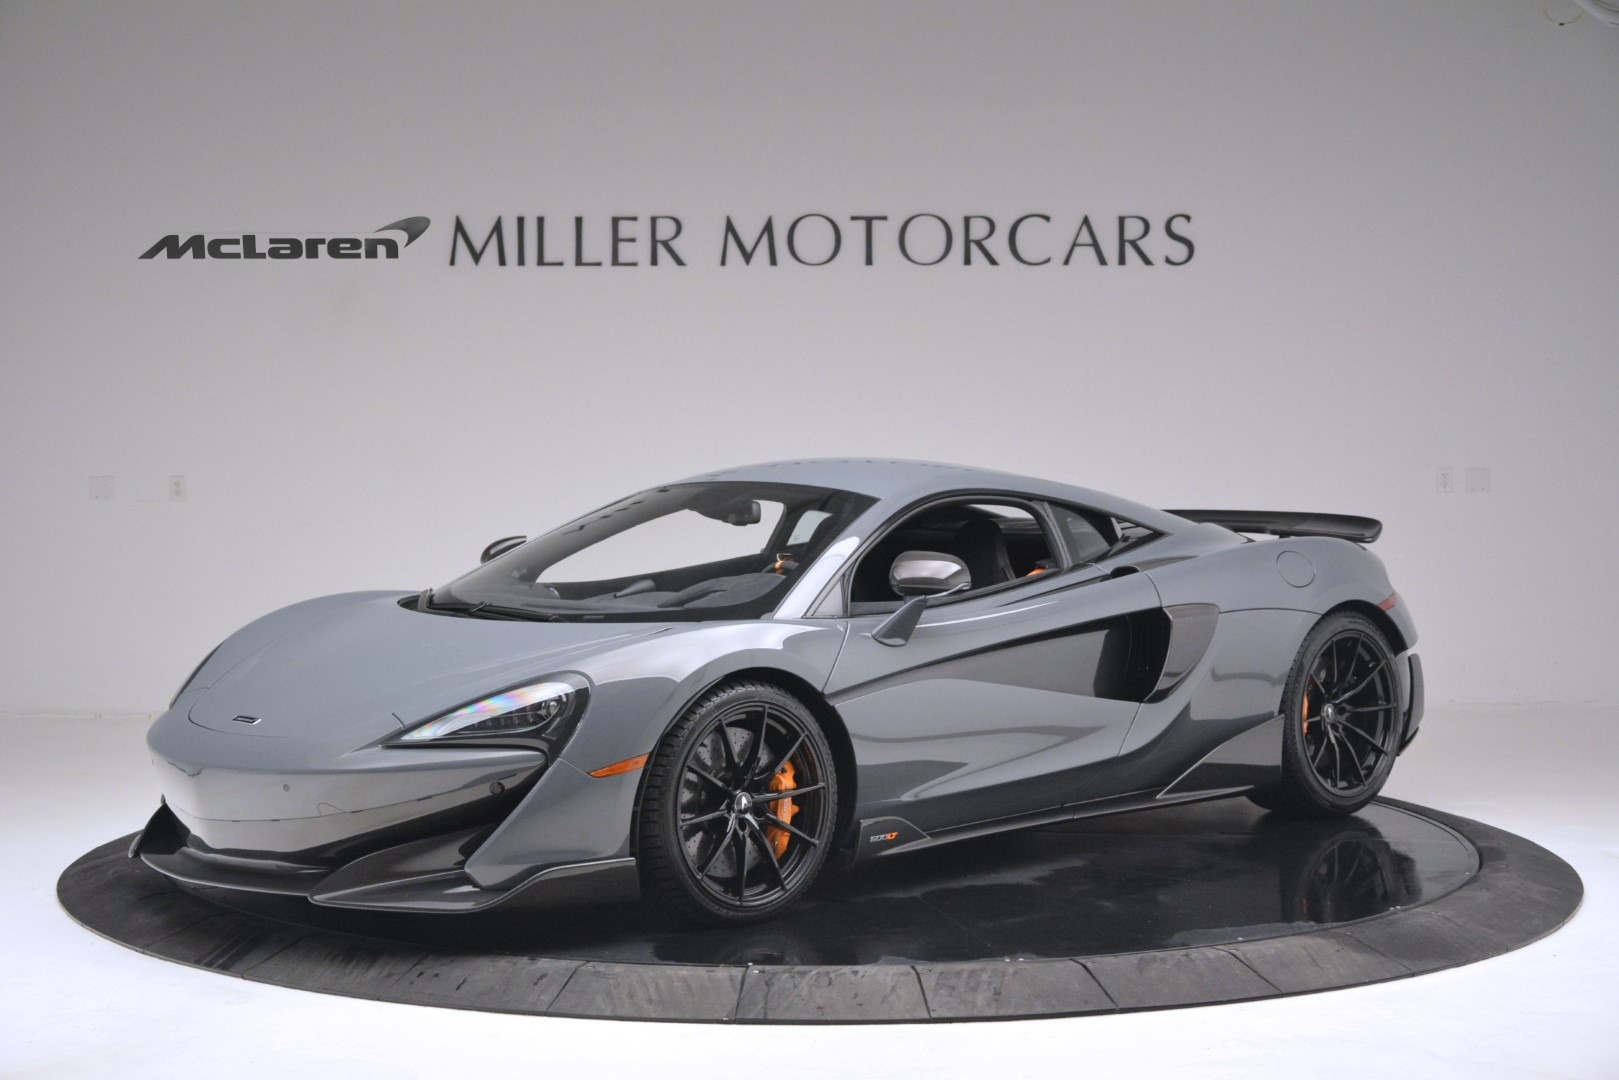 Used 2019 McLaren 600LT for sale Sold at Bugatti of Greenwich in Greenwich CT 06830 1